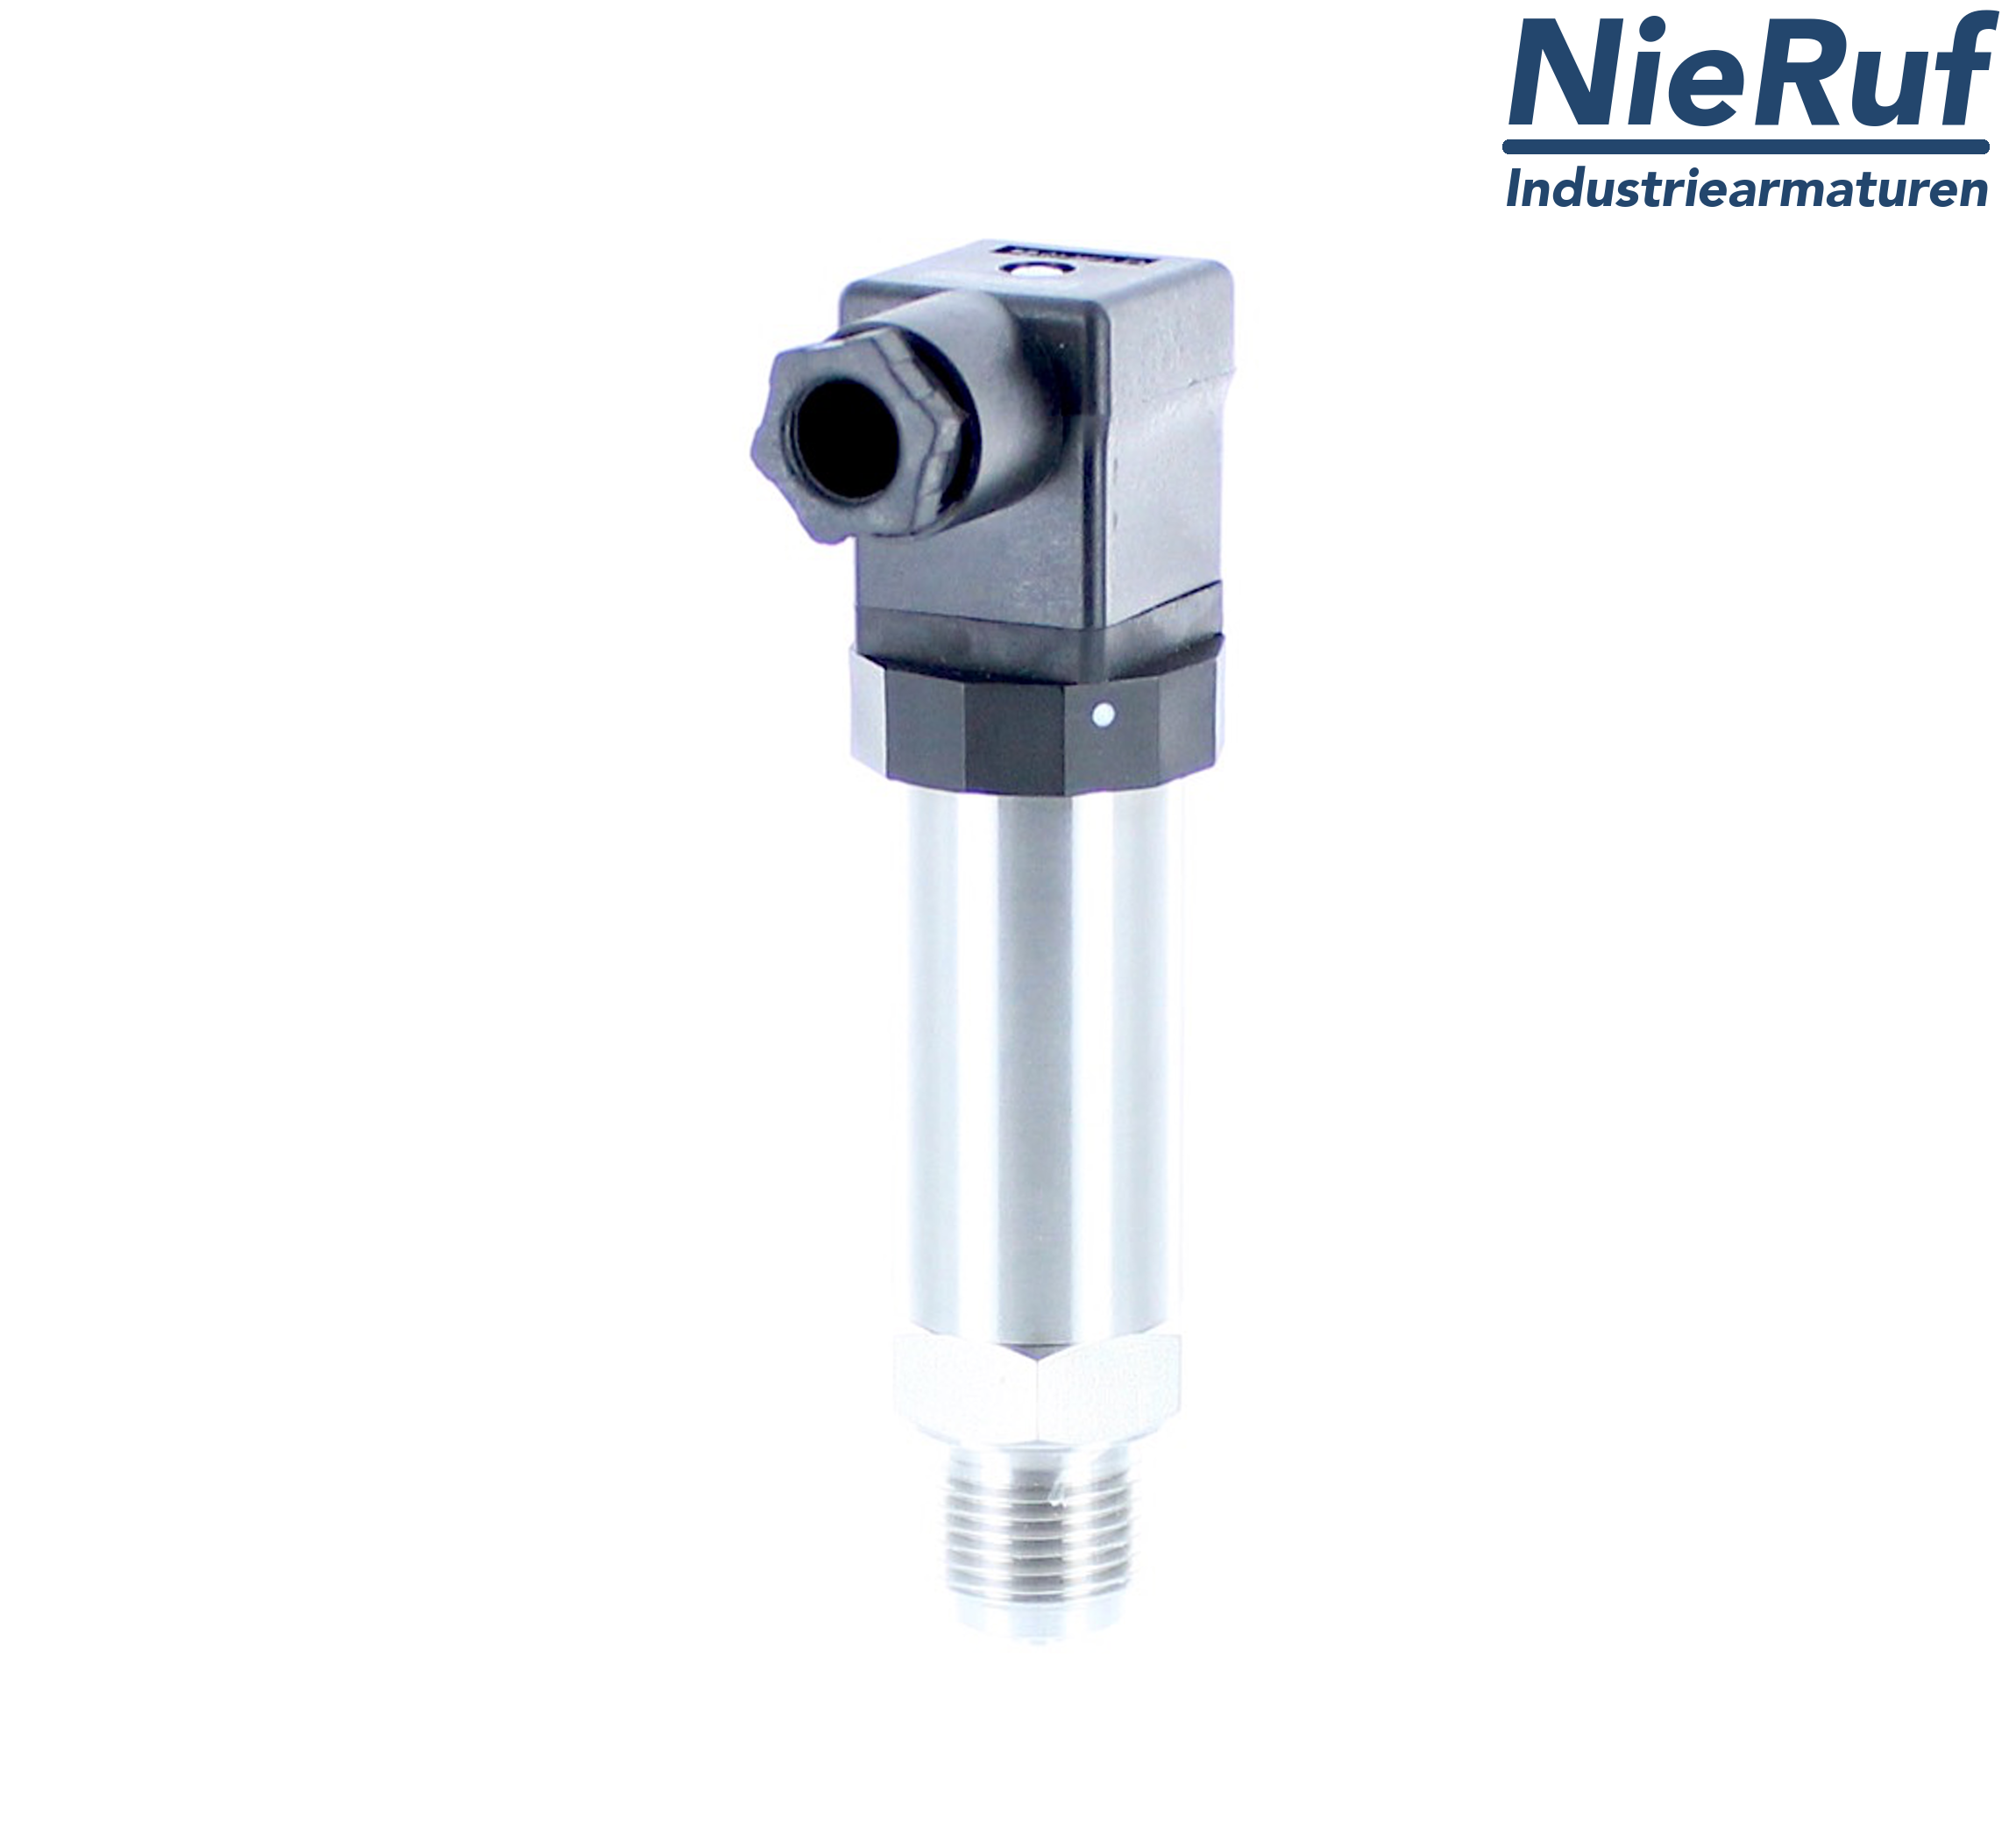 pressure sensor G 1/4" B DS01 stainless steel 2-wire: 4-20mA FPM 0,0 - 600,0 bar